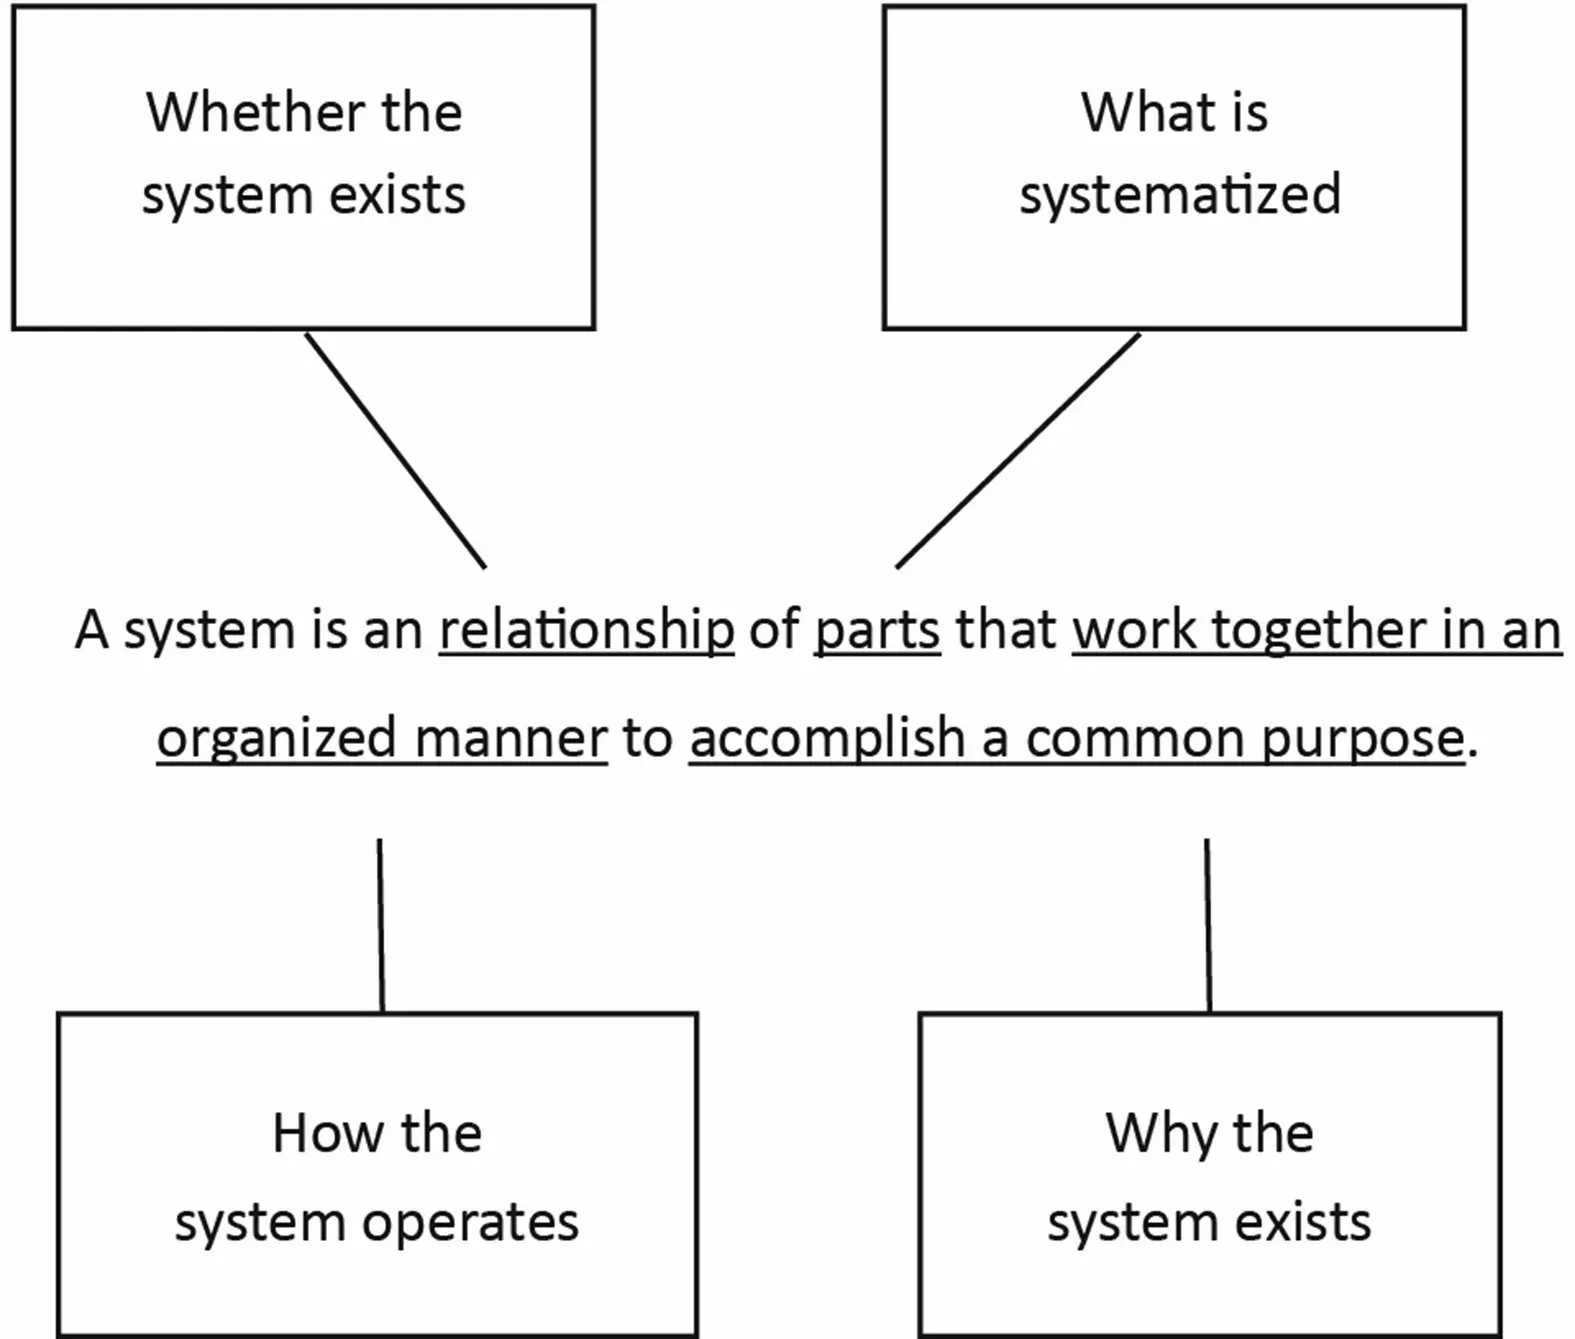 Strategic ambiguities in the definition of systems. Copyright © 2019 Richard Buchanan.